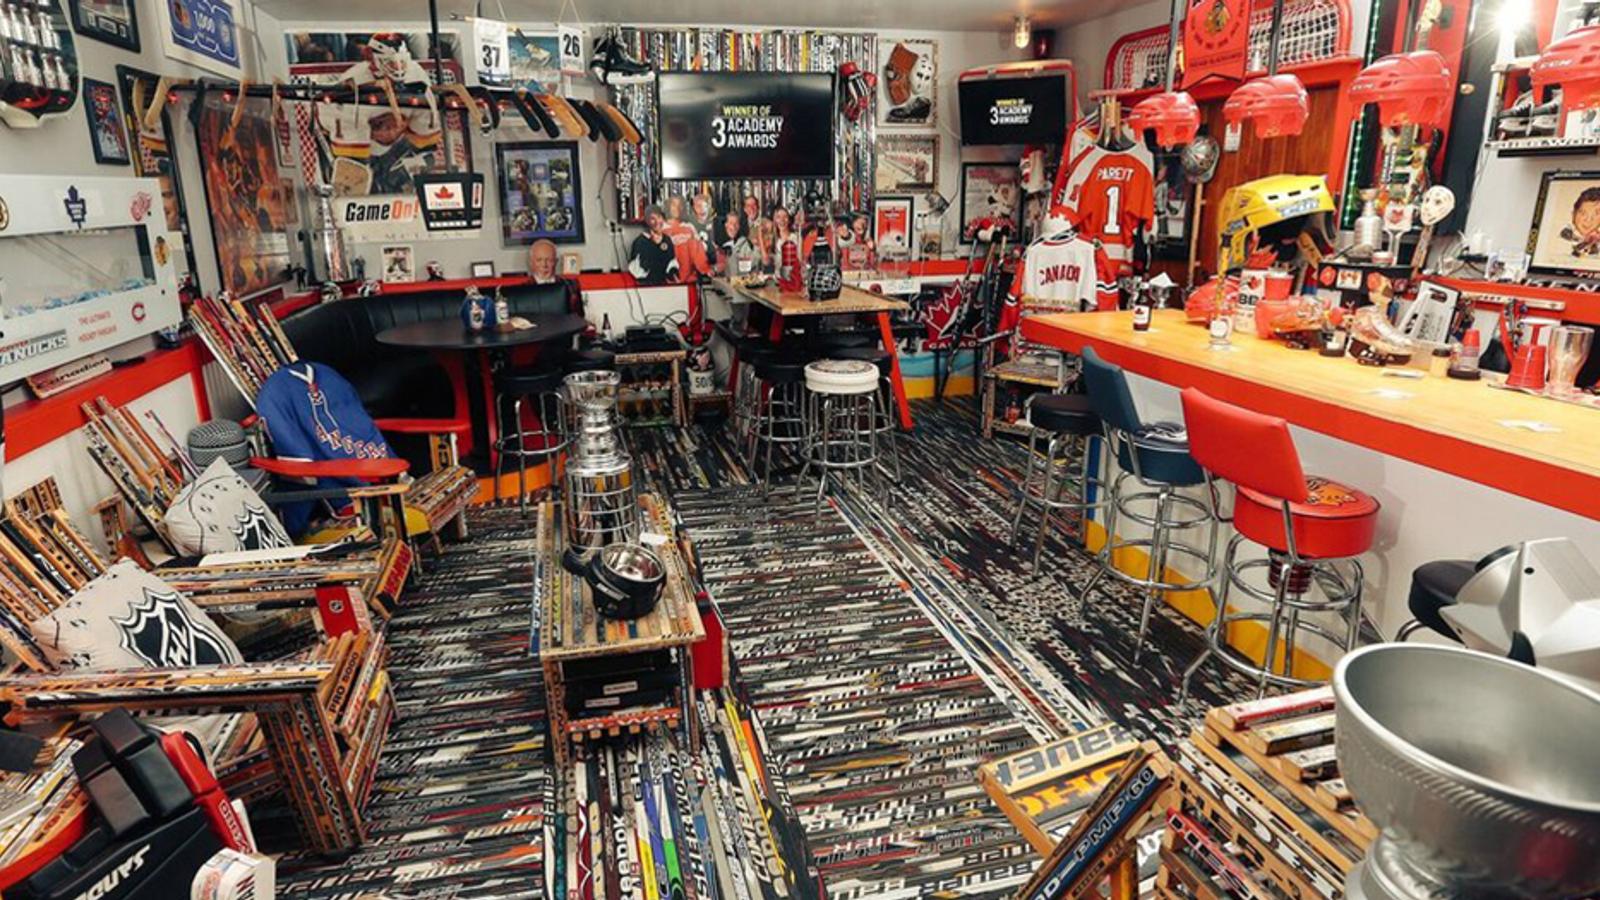 Check out the ultimate hockey fan cave